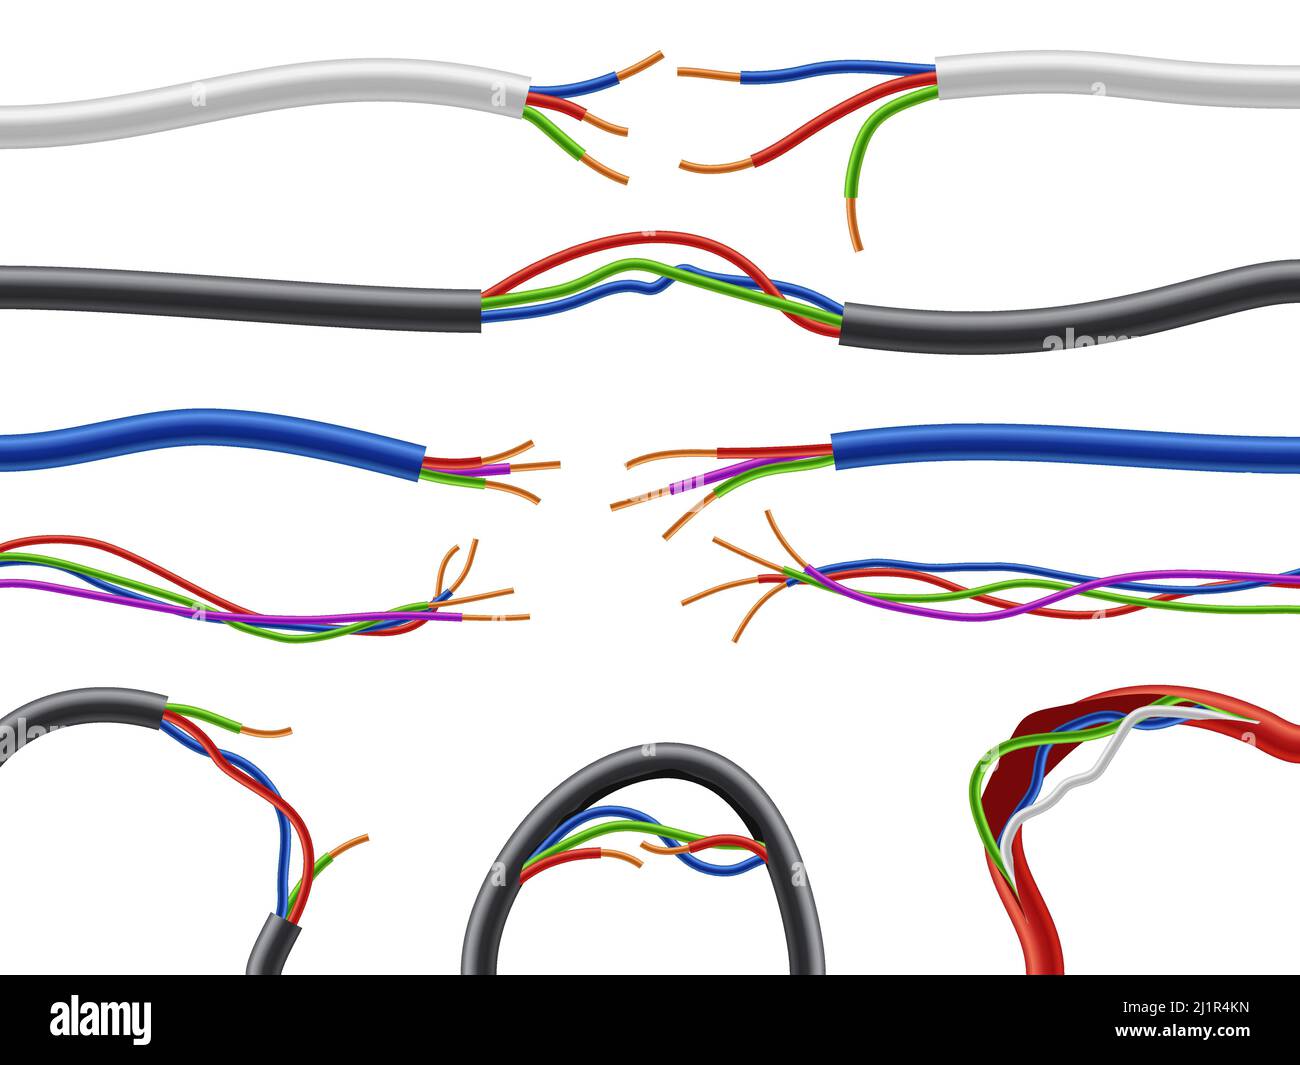 Thick wire Cut Out Stock Images & Pictures - Page 2 - Alamy